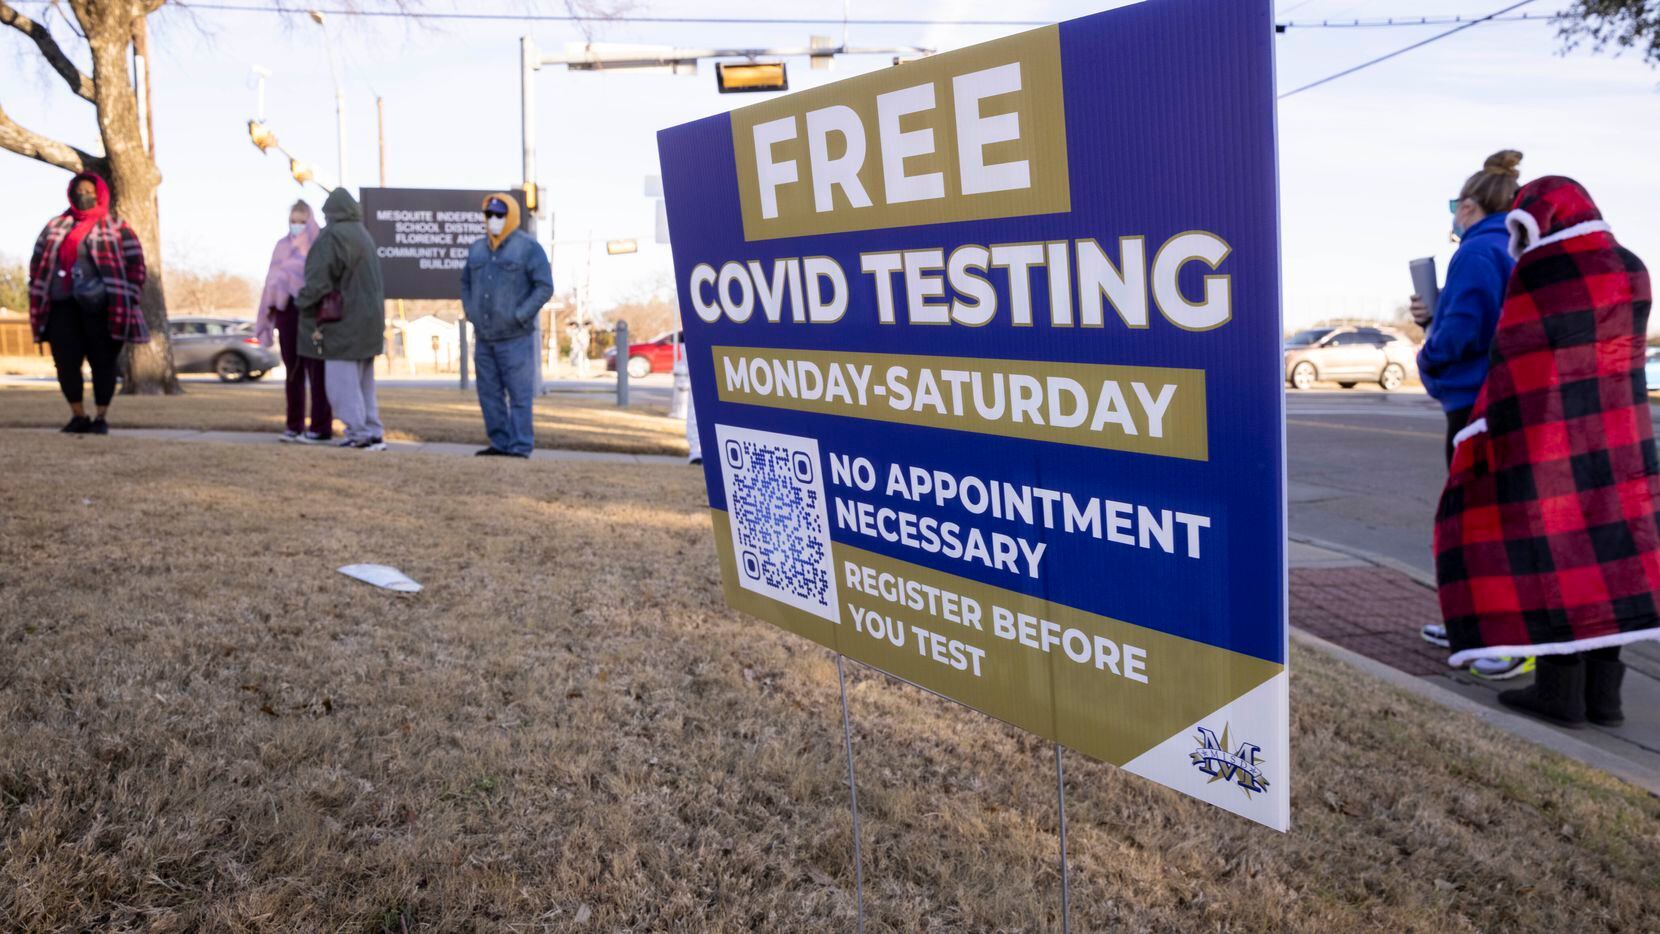 People wait in line to receive free COVID testing from Mesquite ISD Health Services on Jan. 10, 2022, at the MISD Community Education building in Mesquite, Texas.